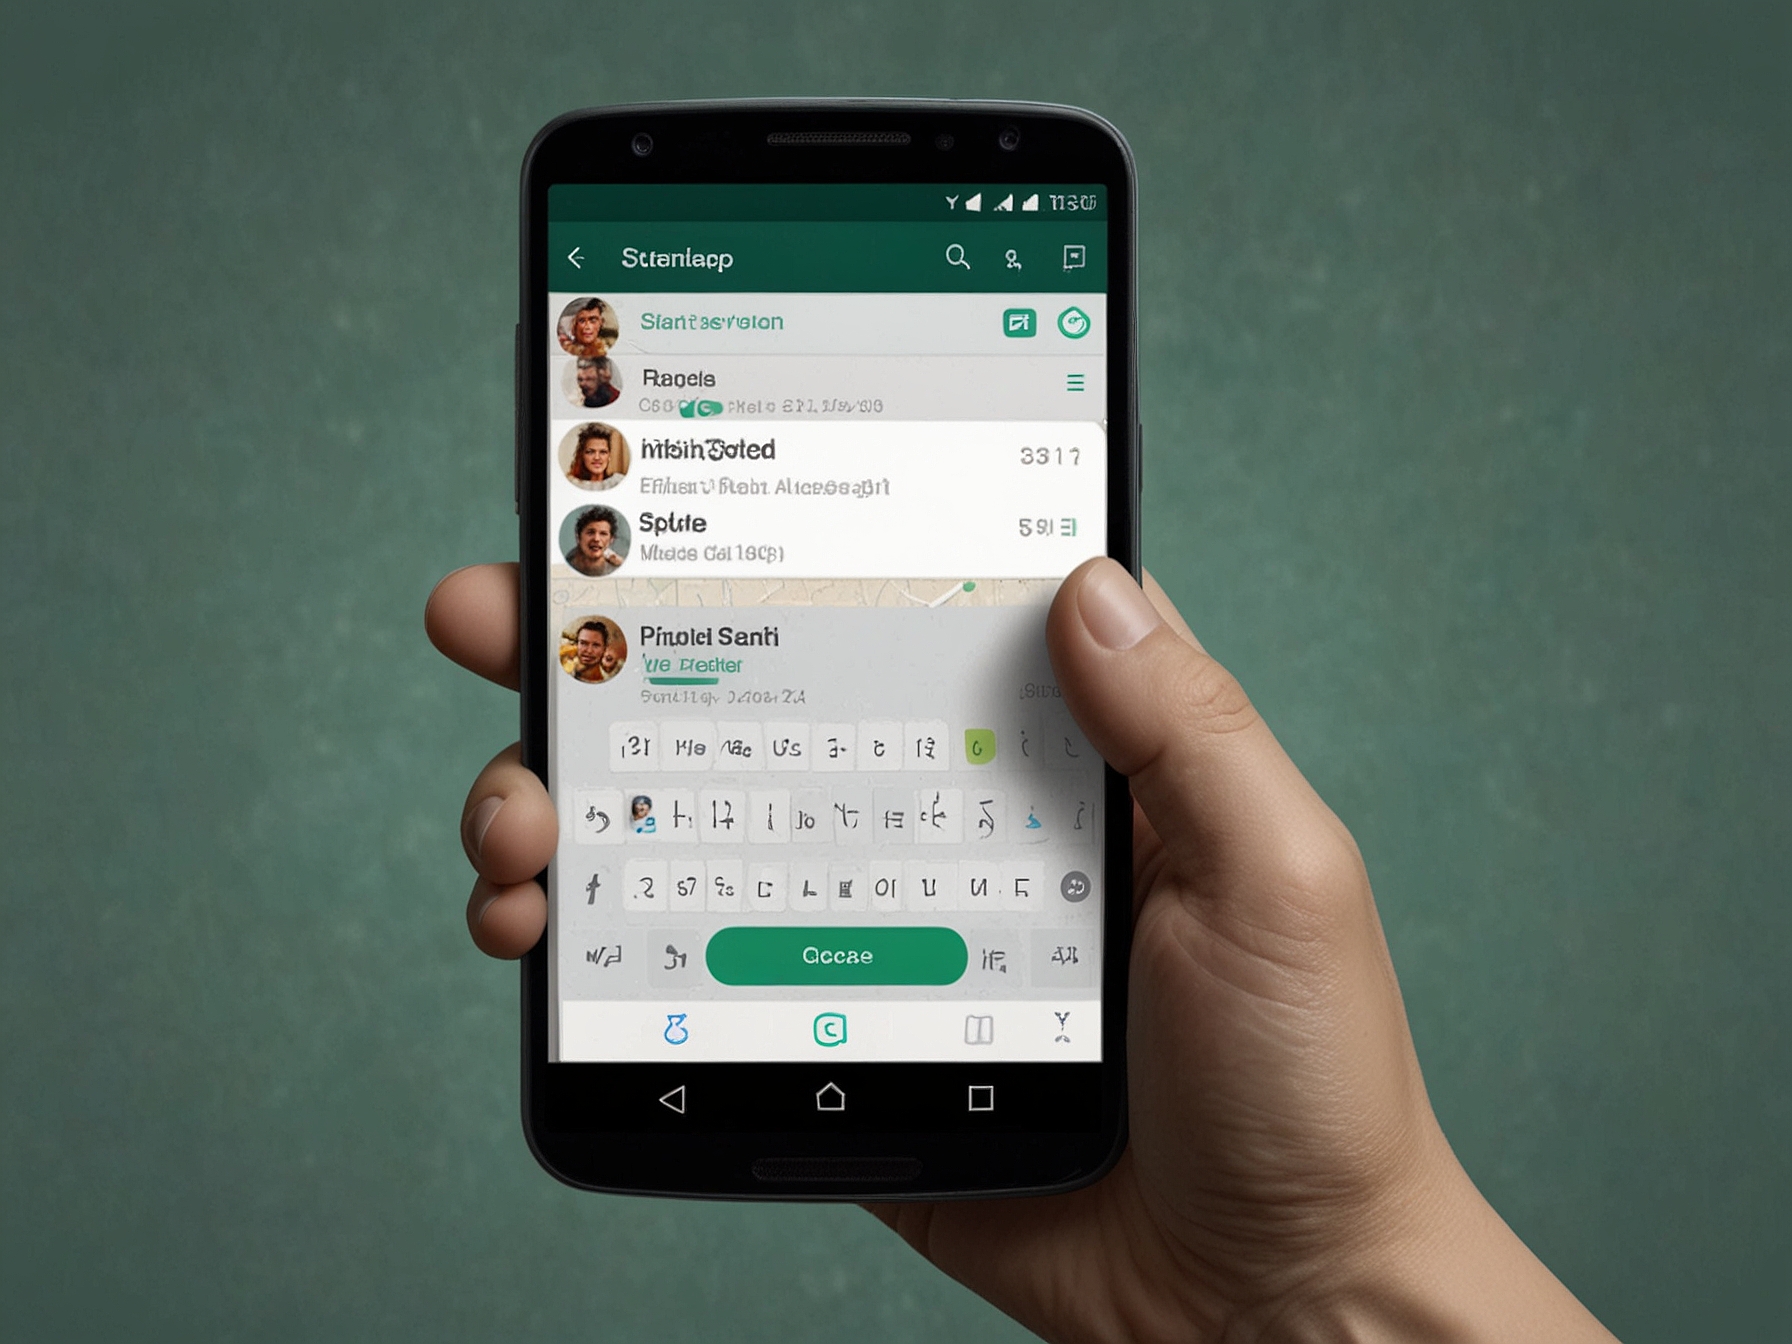 An illustration of the new WhatsApp interface showing a user dialing a number directly through the in-app dialer, highlighting the convenience of making calls without accessing the contact list.